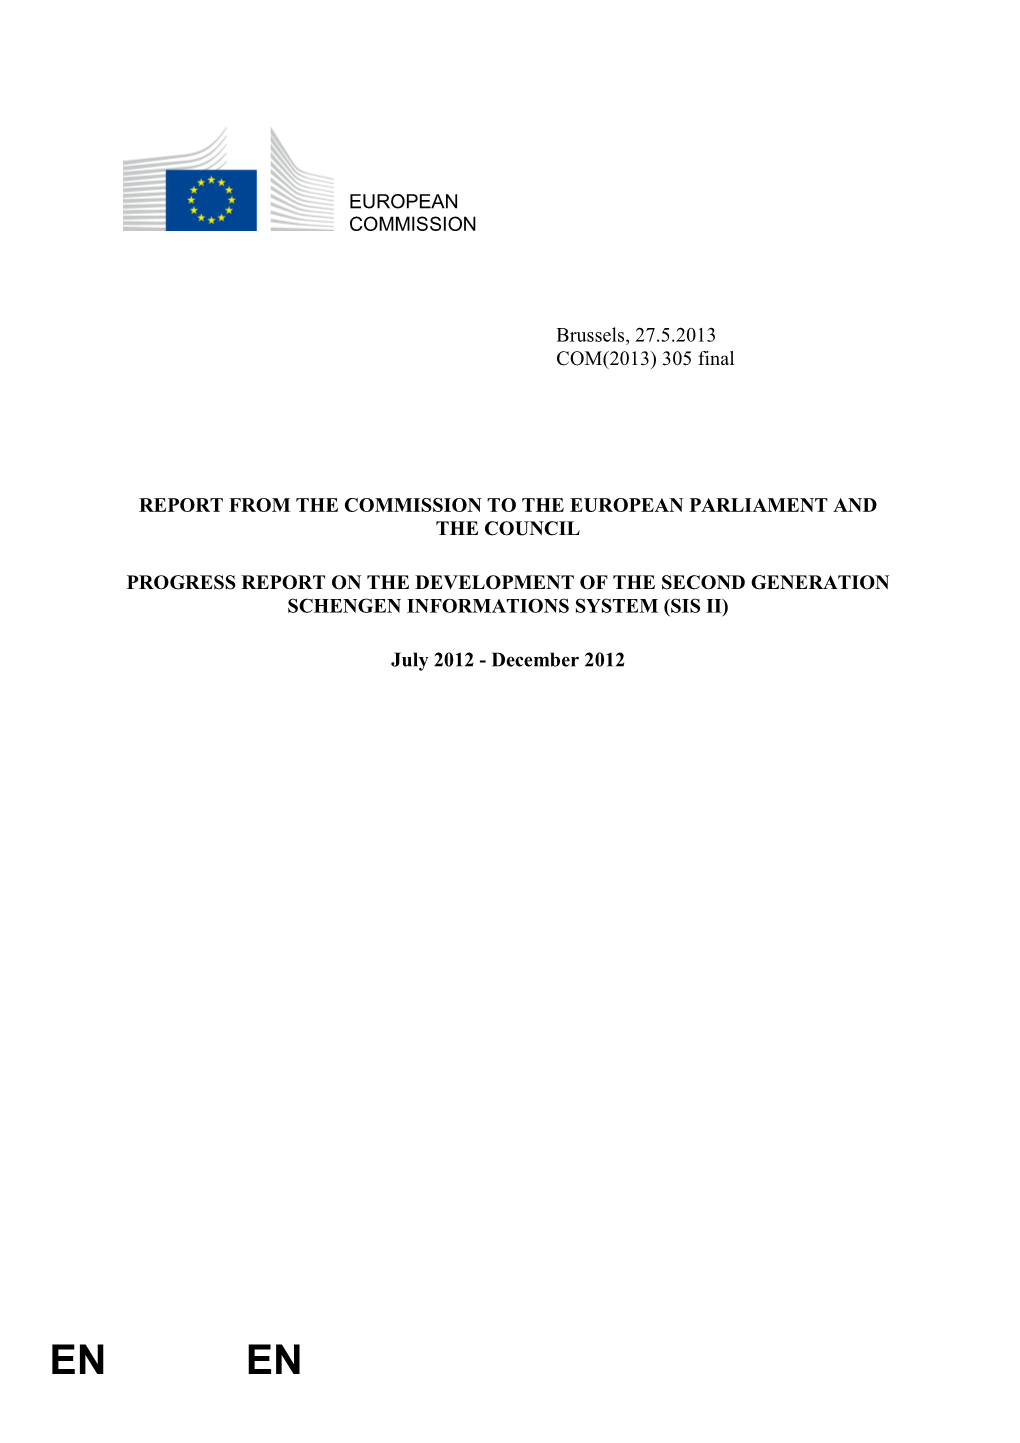 Report from the Commission to the European Parliament and the Council